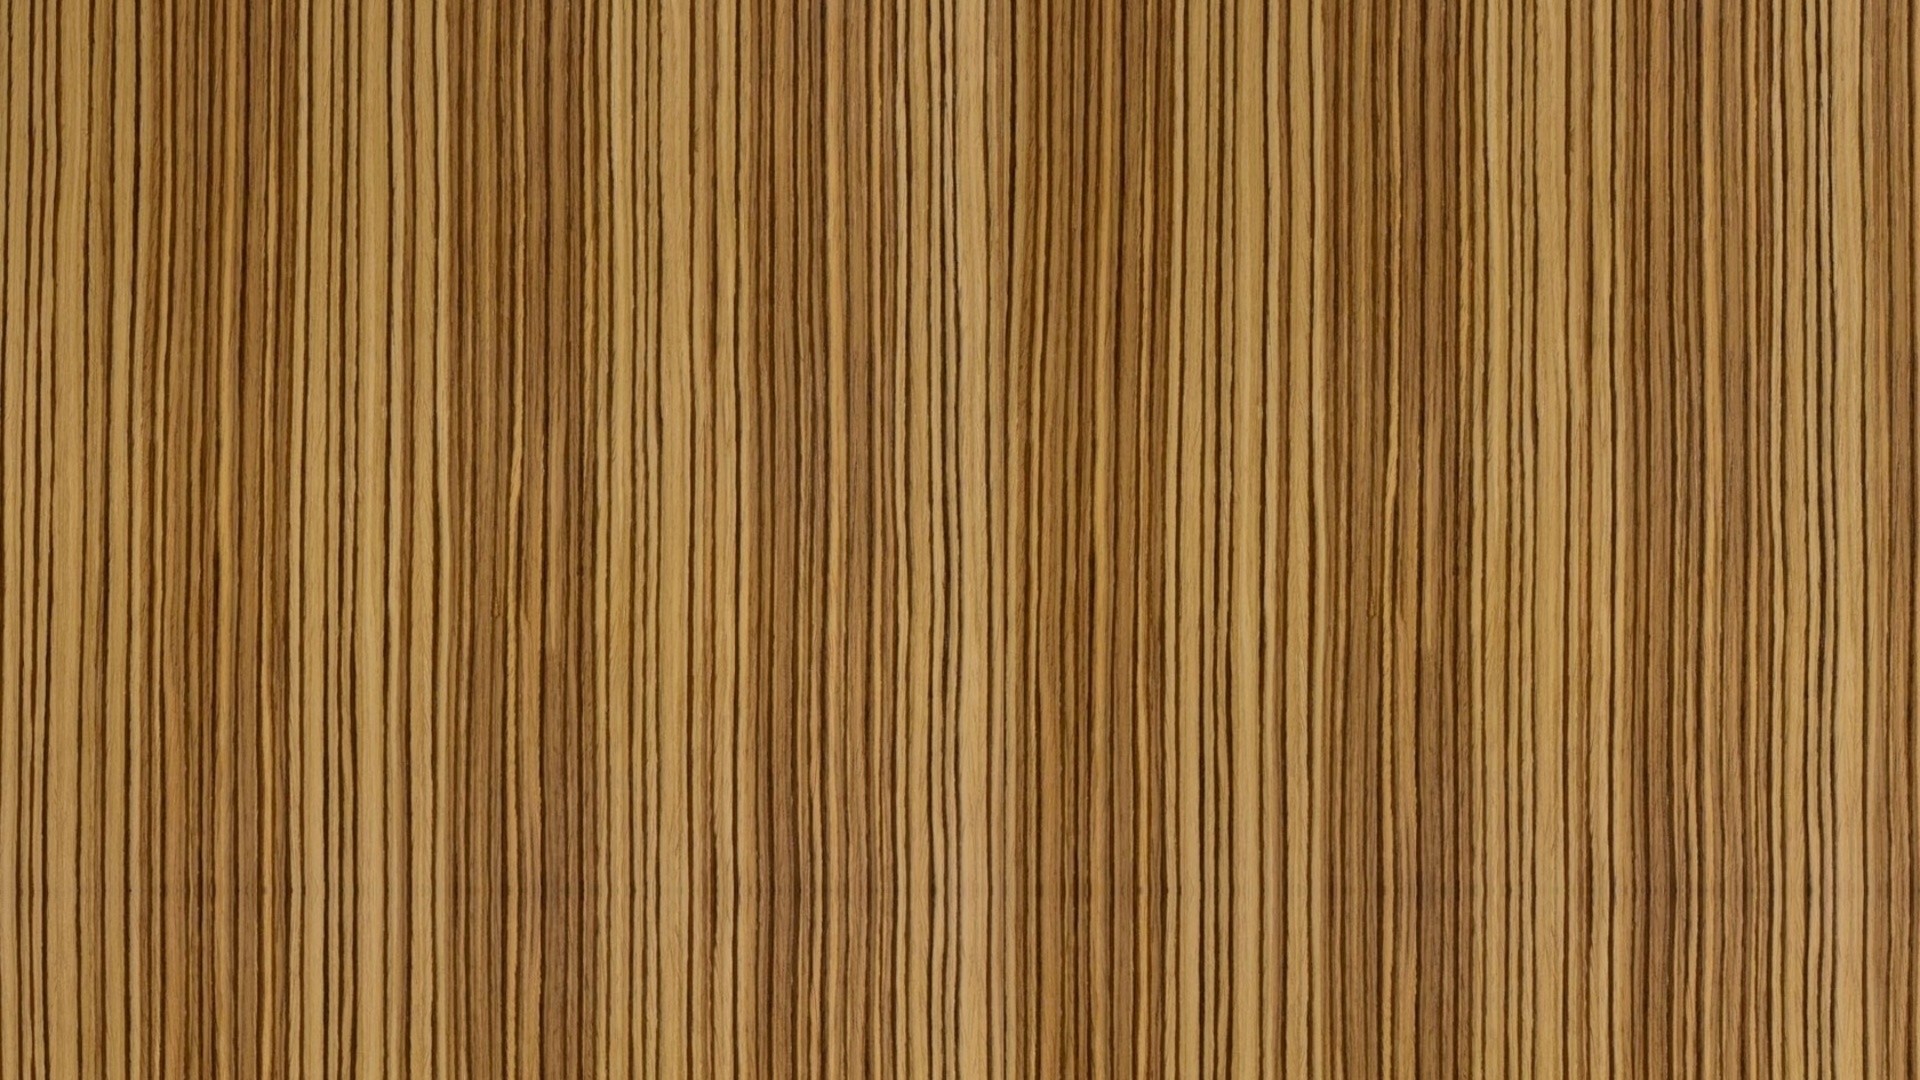 1920x1080 Wood Pattern Wallpapers Group (74+)